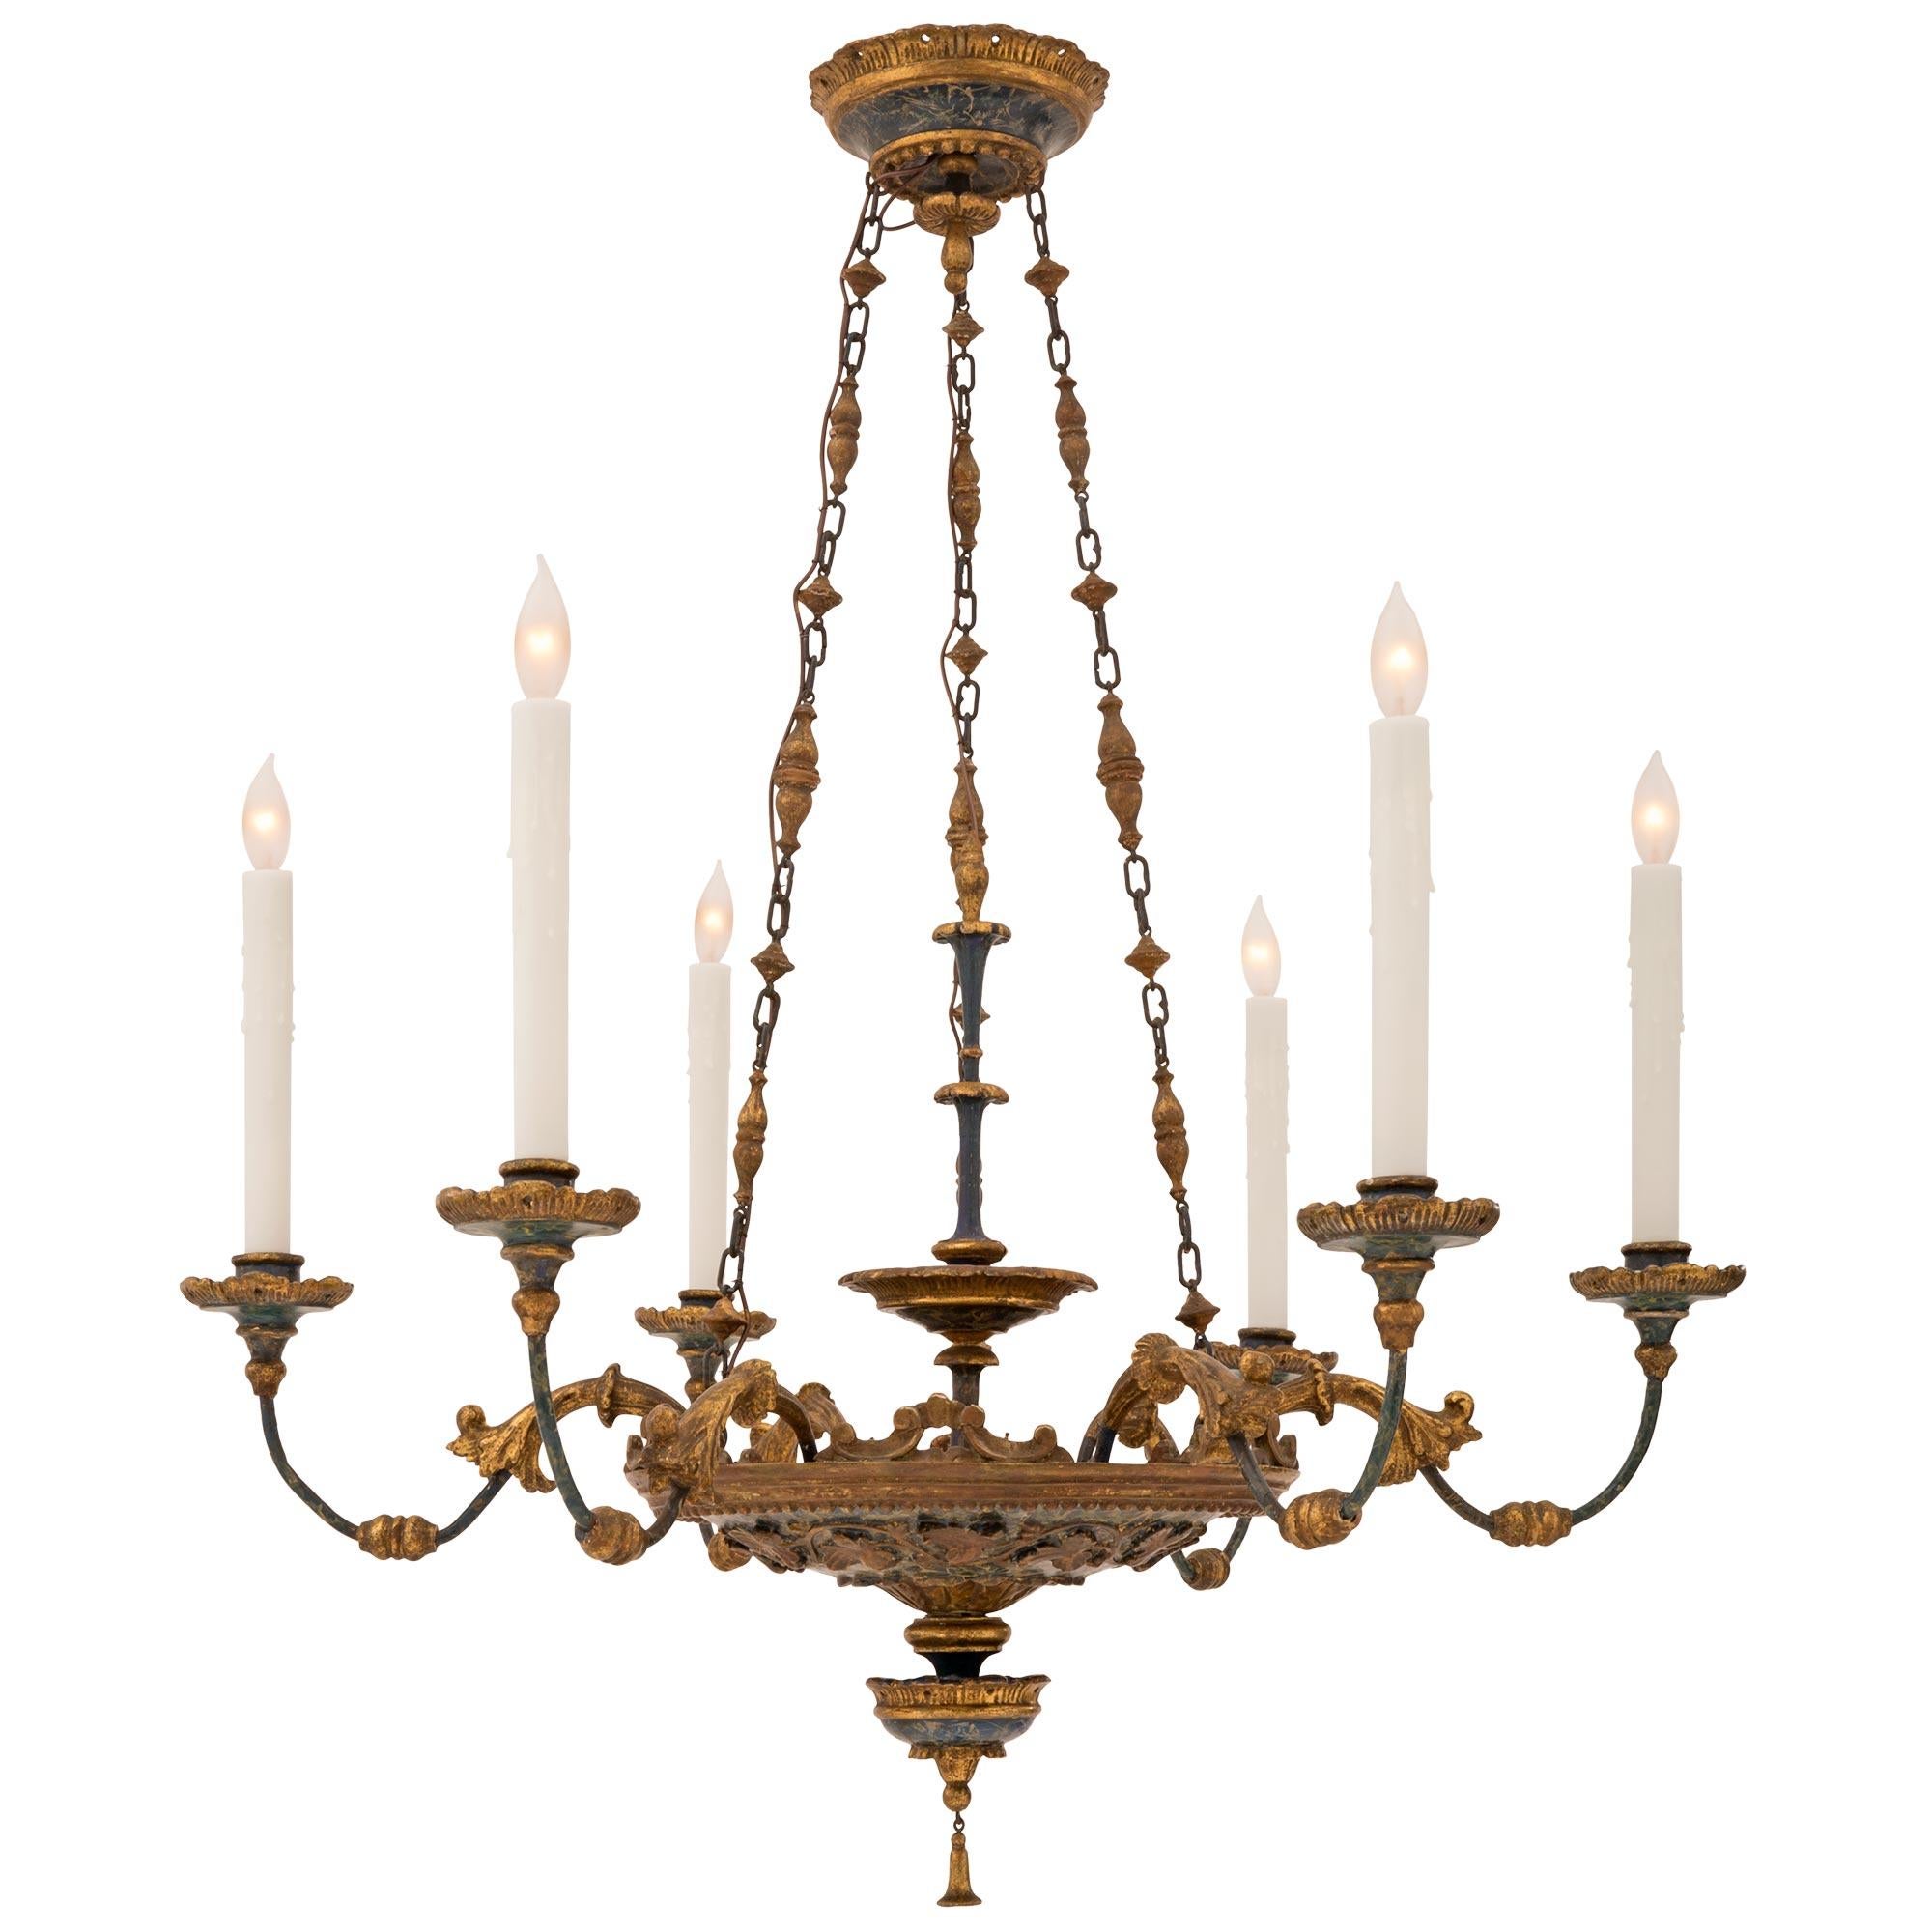 A lovely Italian 19th century Louis XVI st. giltwood and faux painted marble chandelier. The six arm chandelier is centered by a charming bottom bell shaped giltwood pendant below the striking warm blue colored faux painted marble body with a